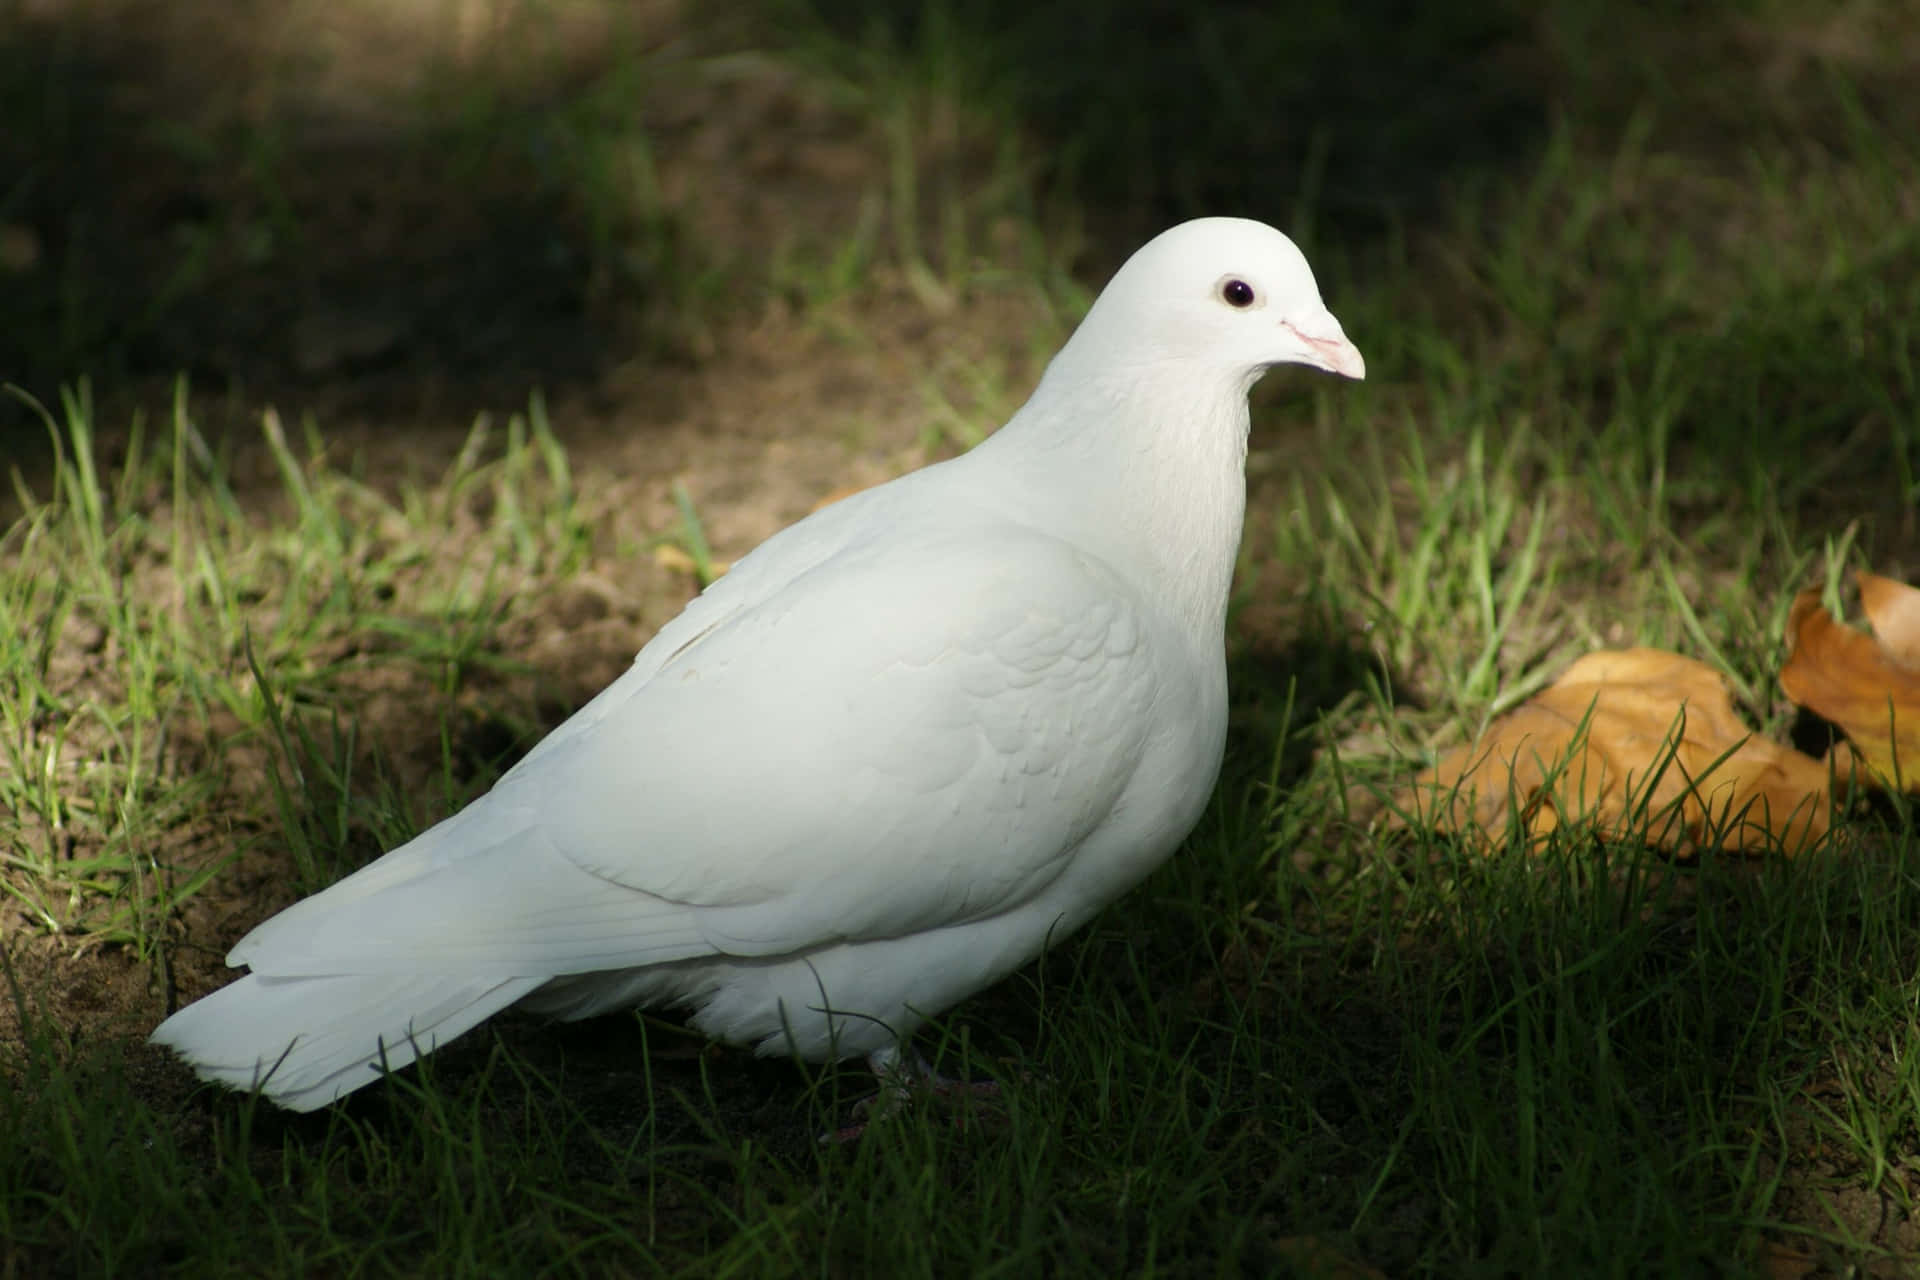 A White Pigeon Standing In The Grass